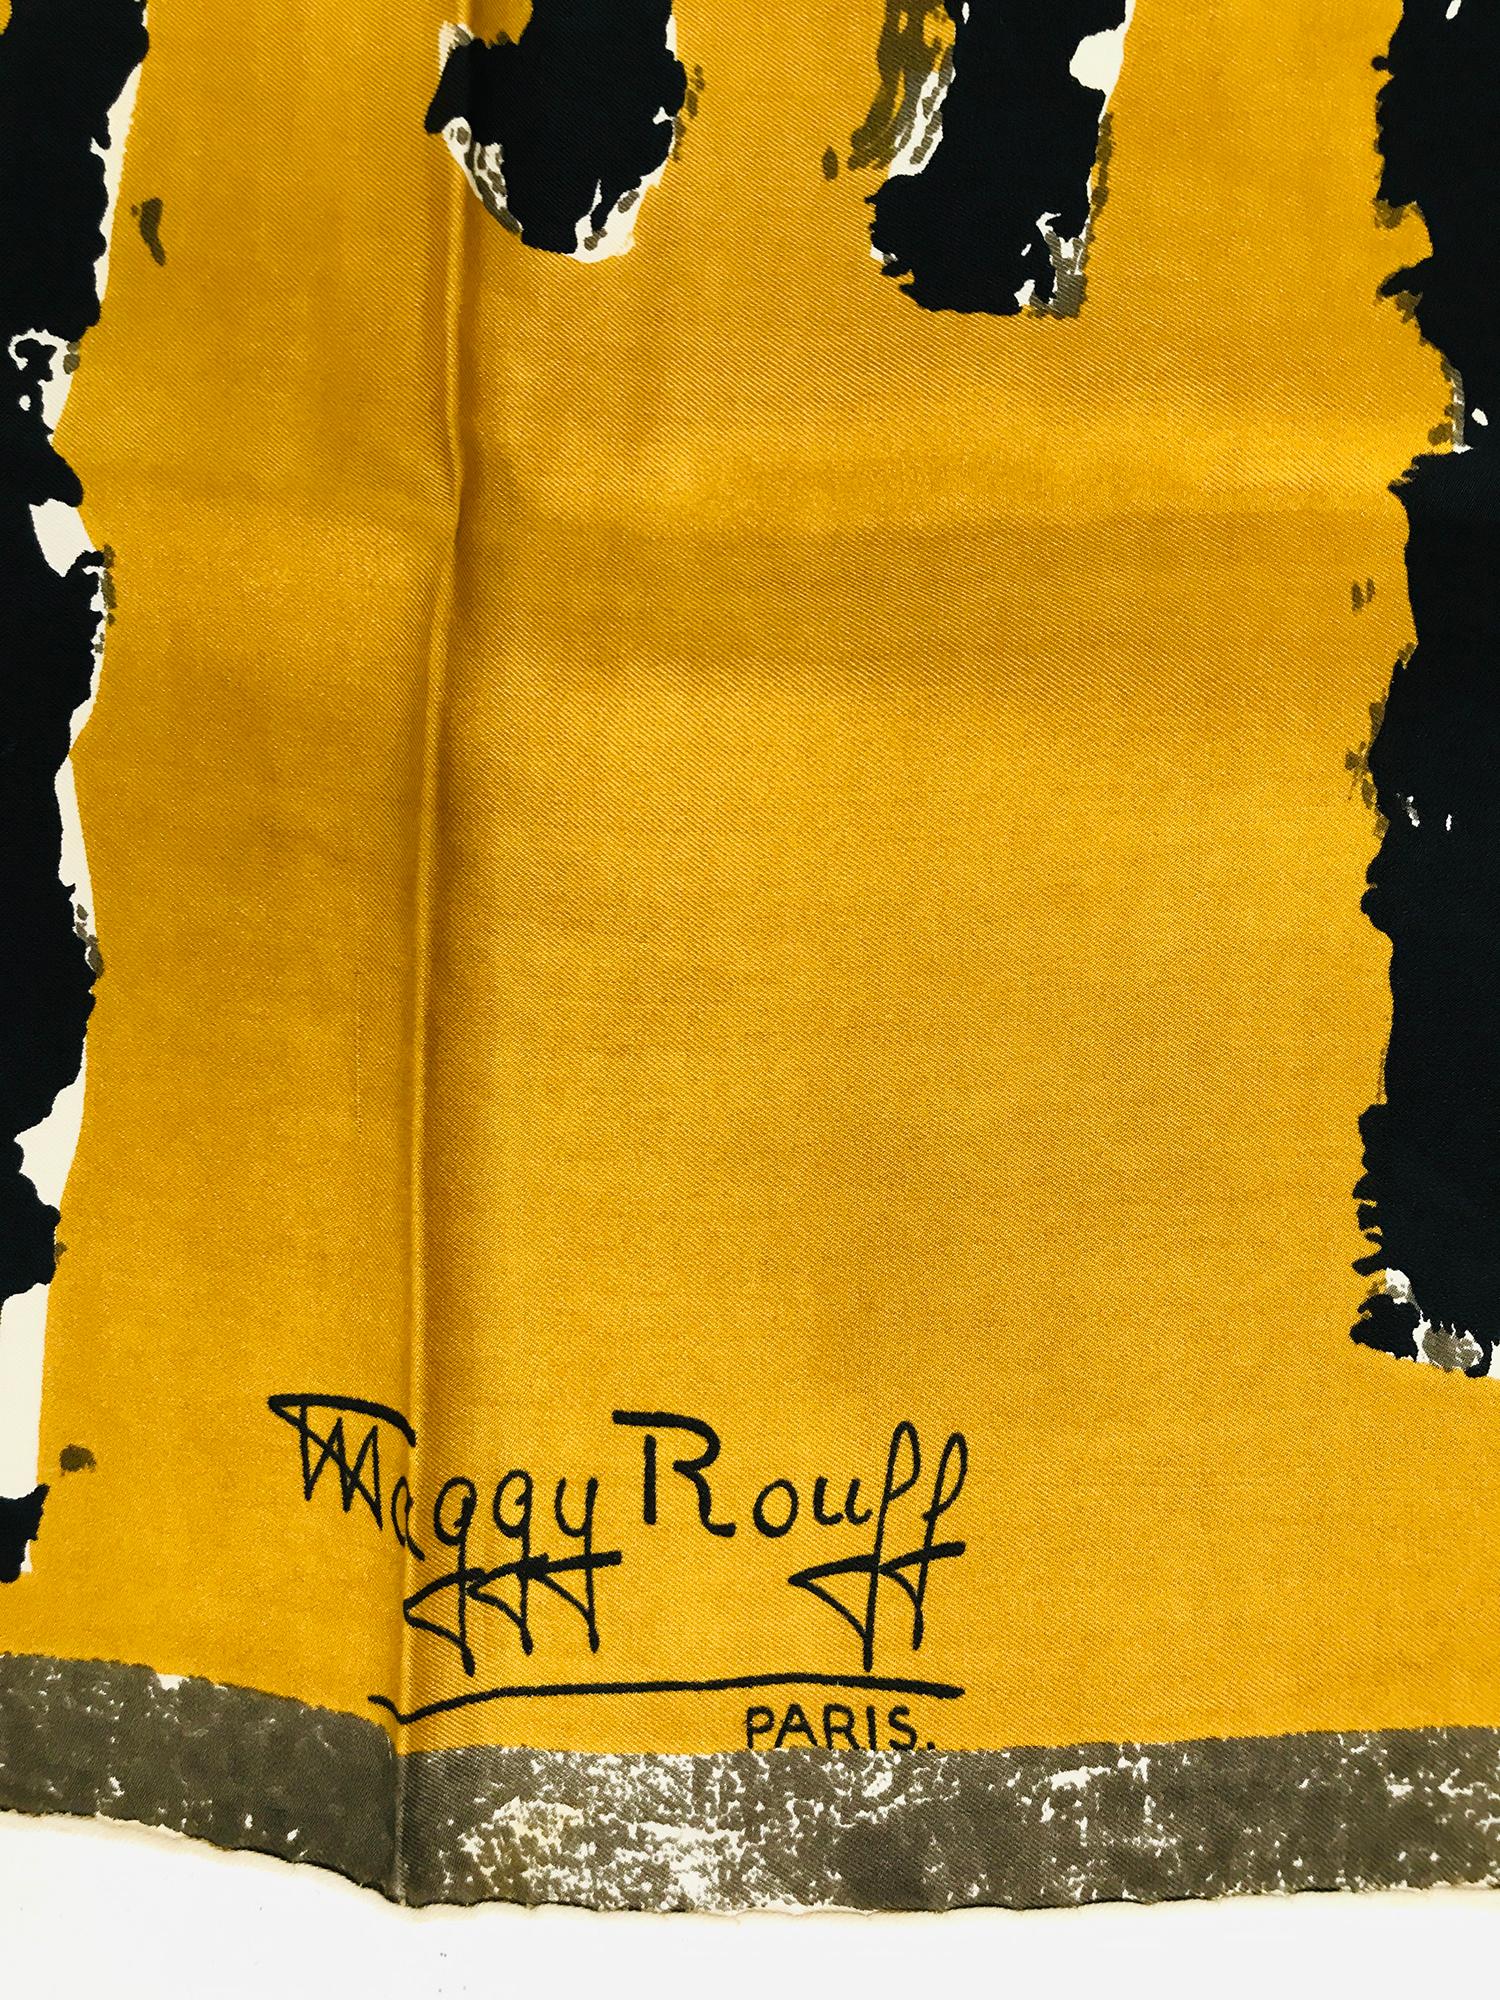 Maggy Rouff The cats of Paris, silk cat scarf in gold & black from the 1960s, perfect art to frame. 29 1/2